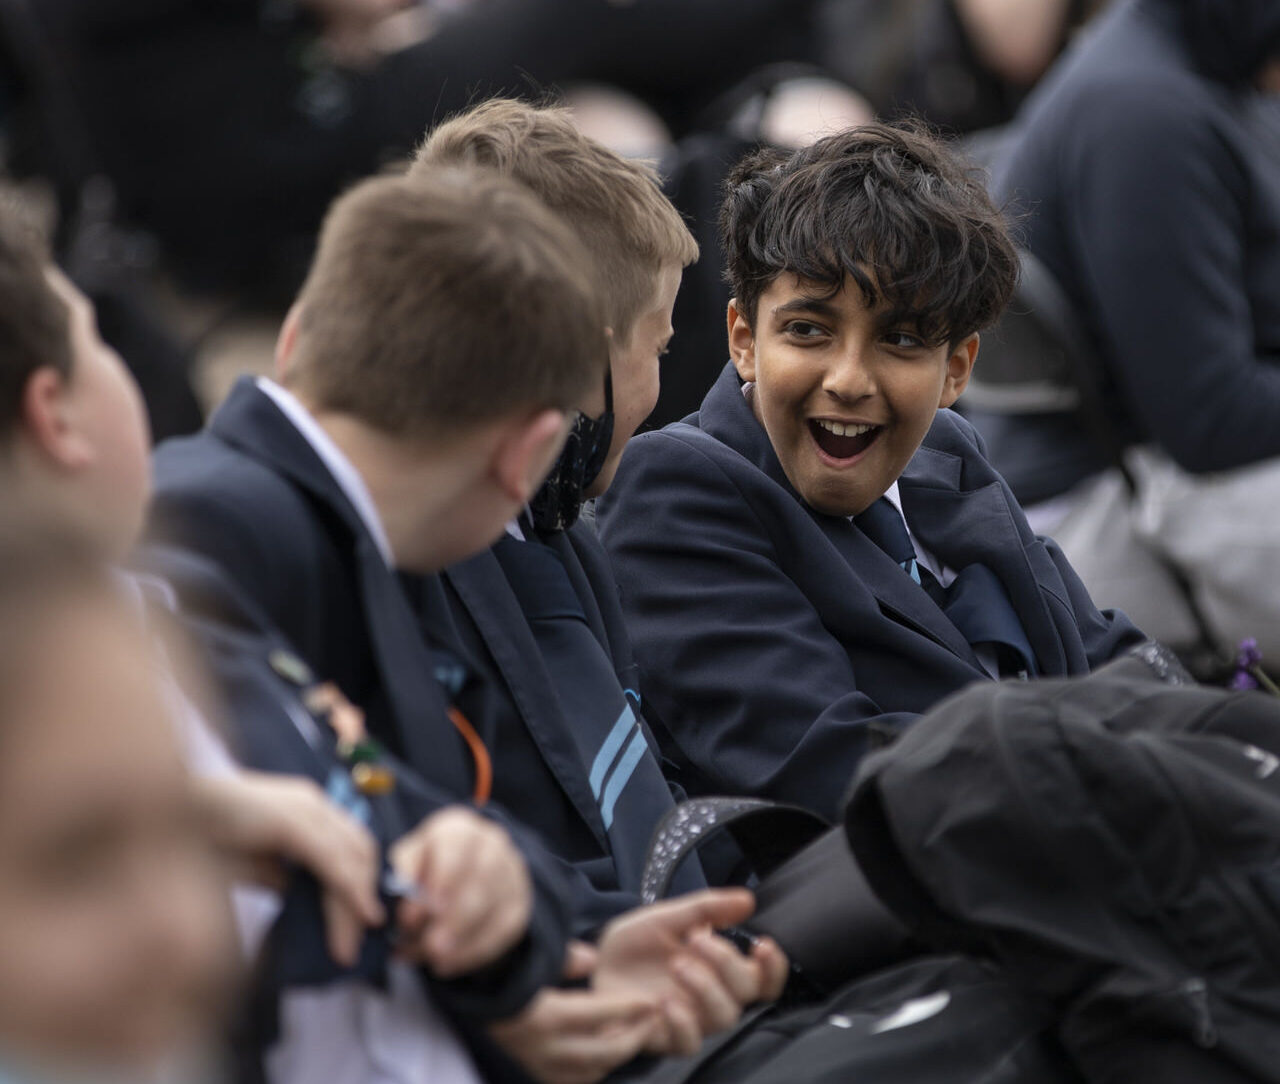 A secondary school pupil in uniform sits with other students as part of the audience at an outdoor show. Their expression is one of excitement, wonder and delight.